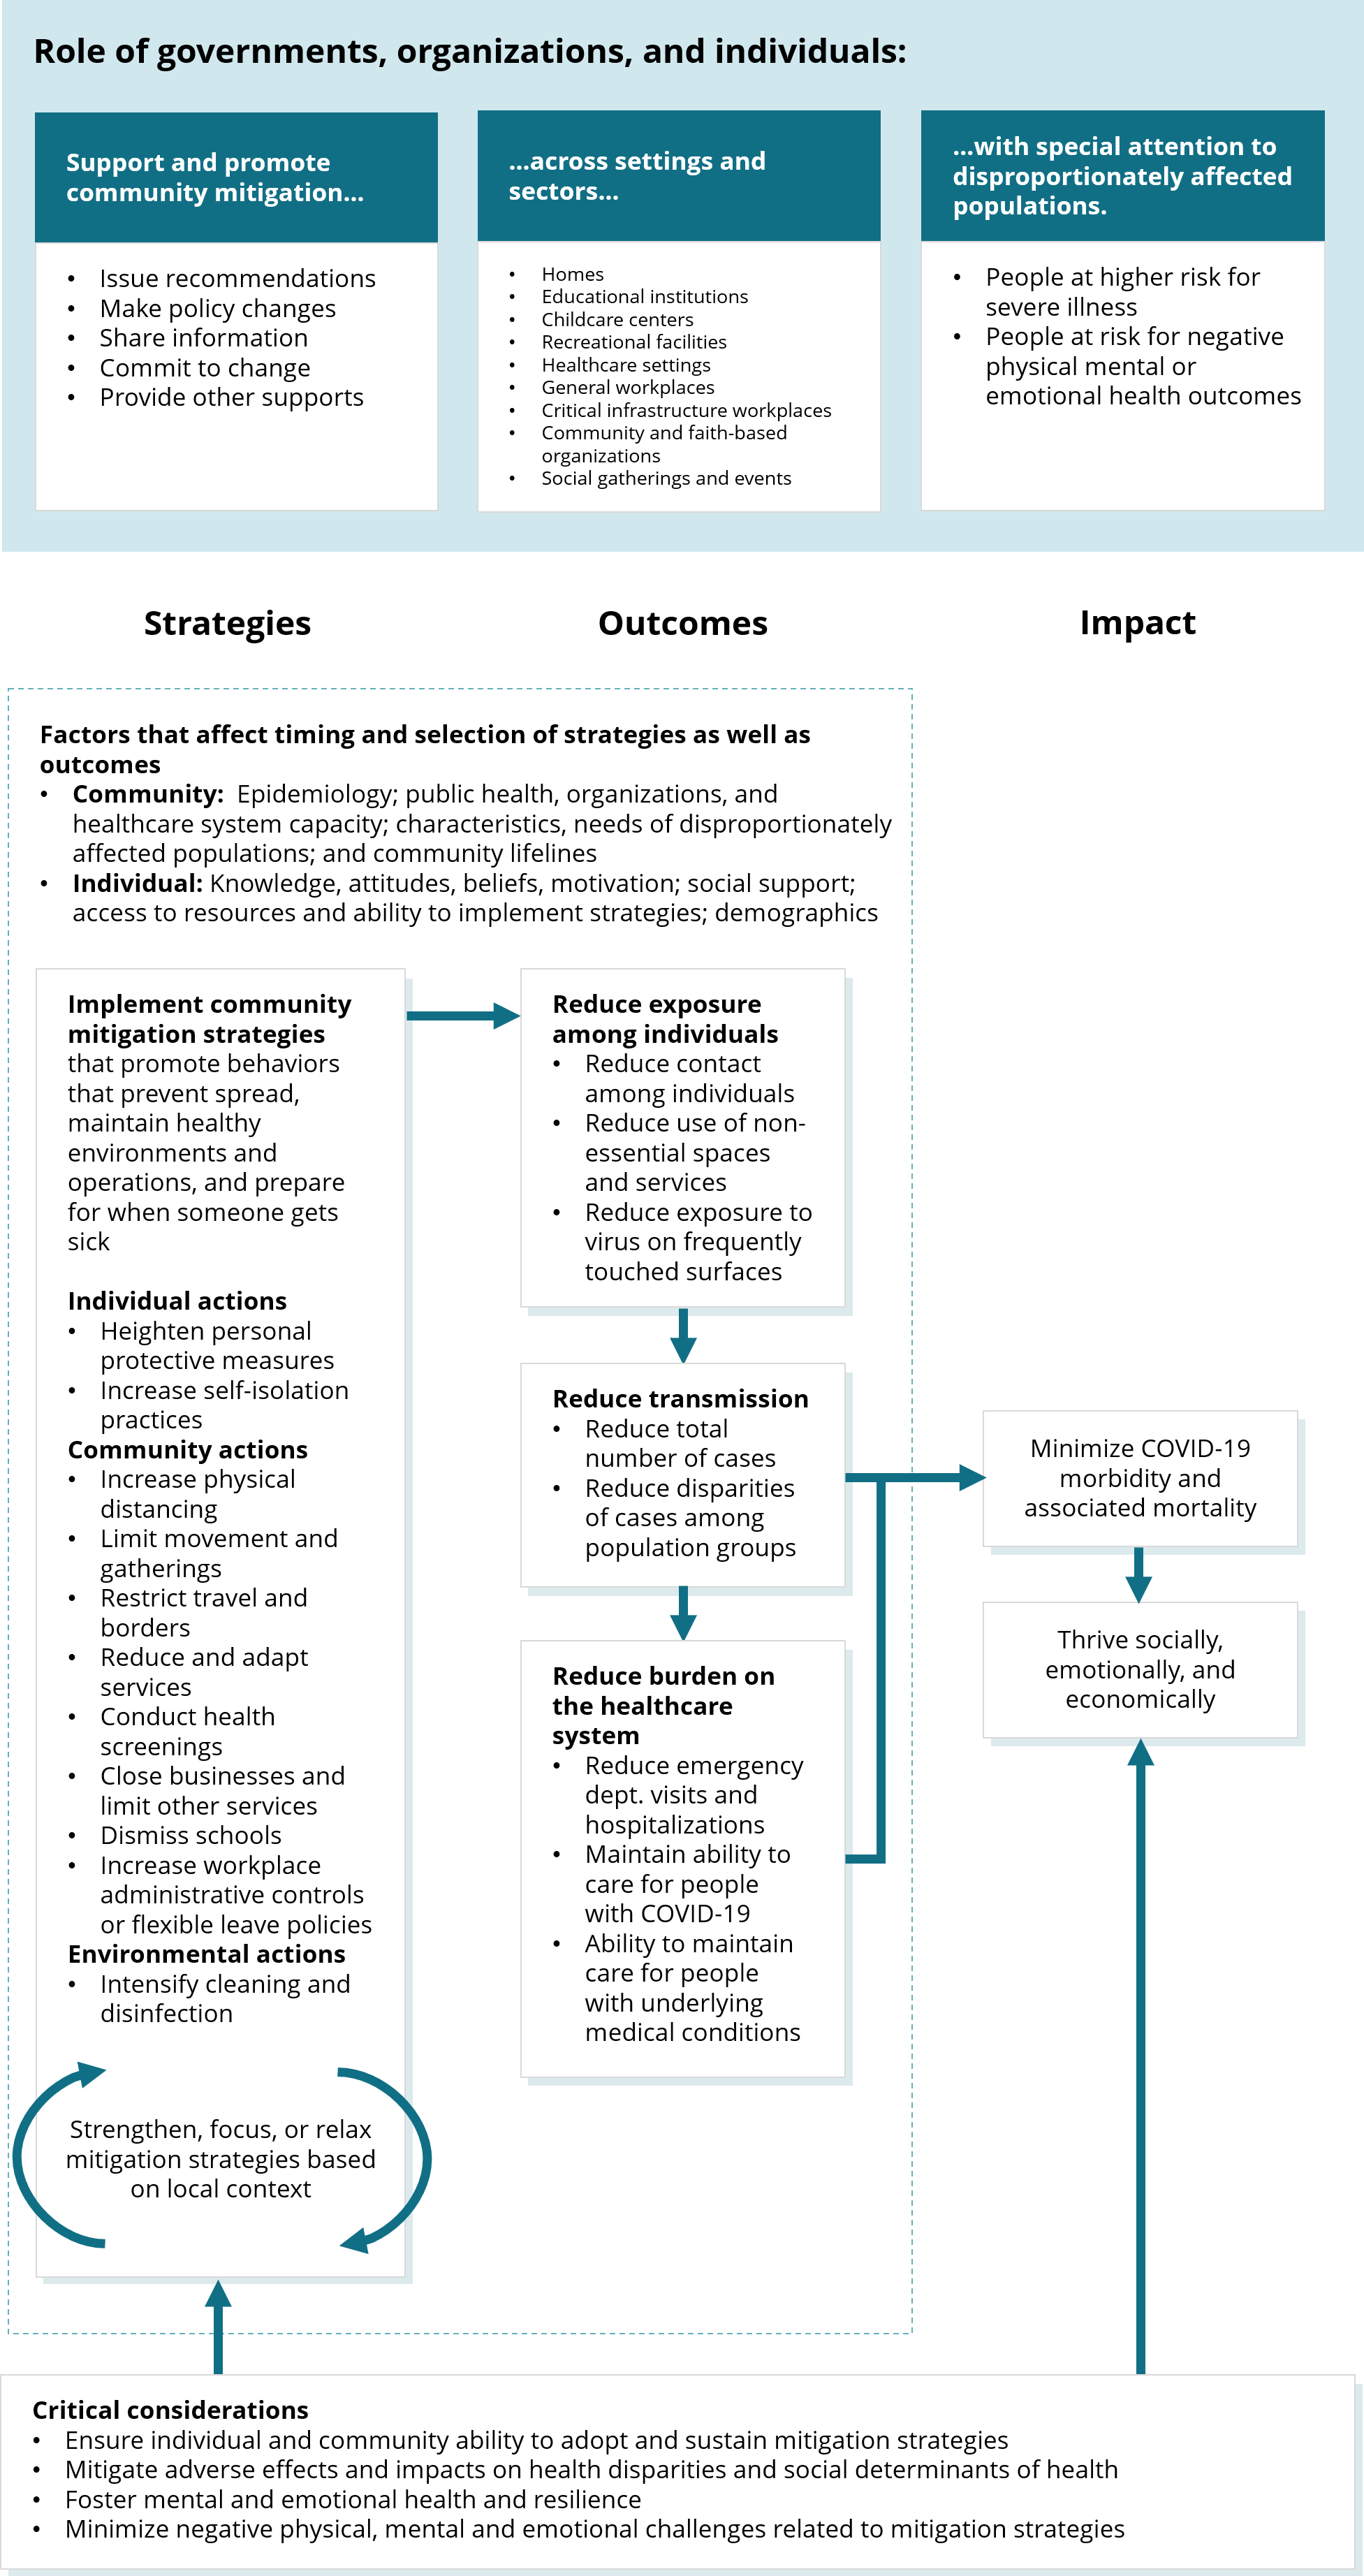 Community mitigation logic diagram outlining the role of governments, organizations, and individuals